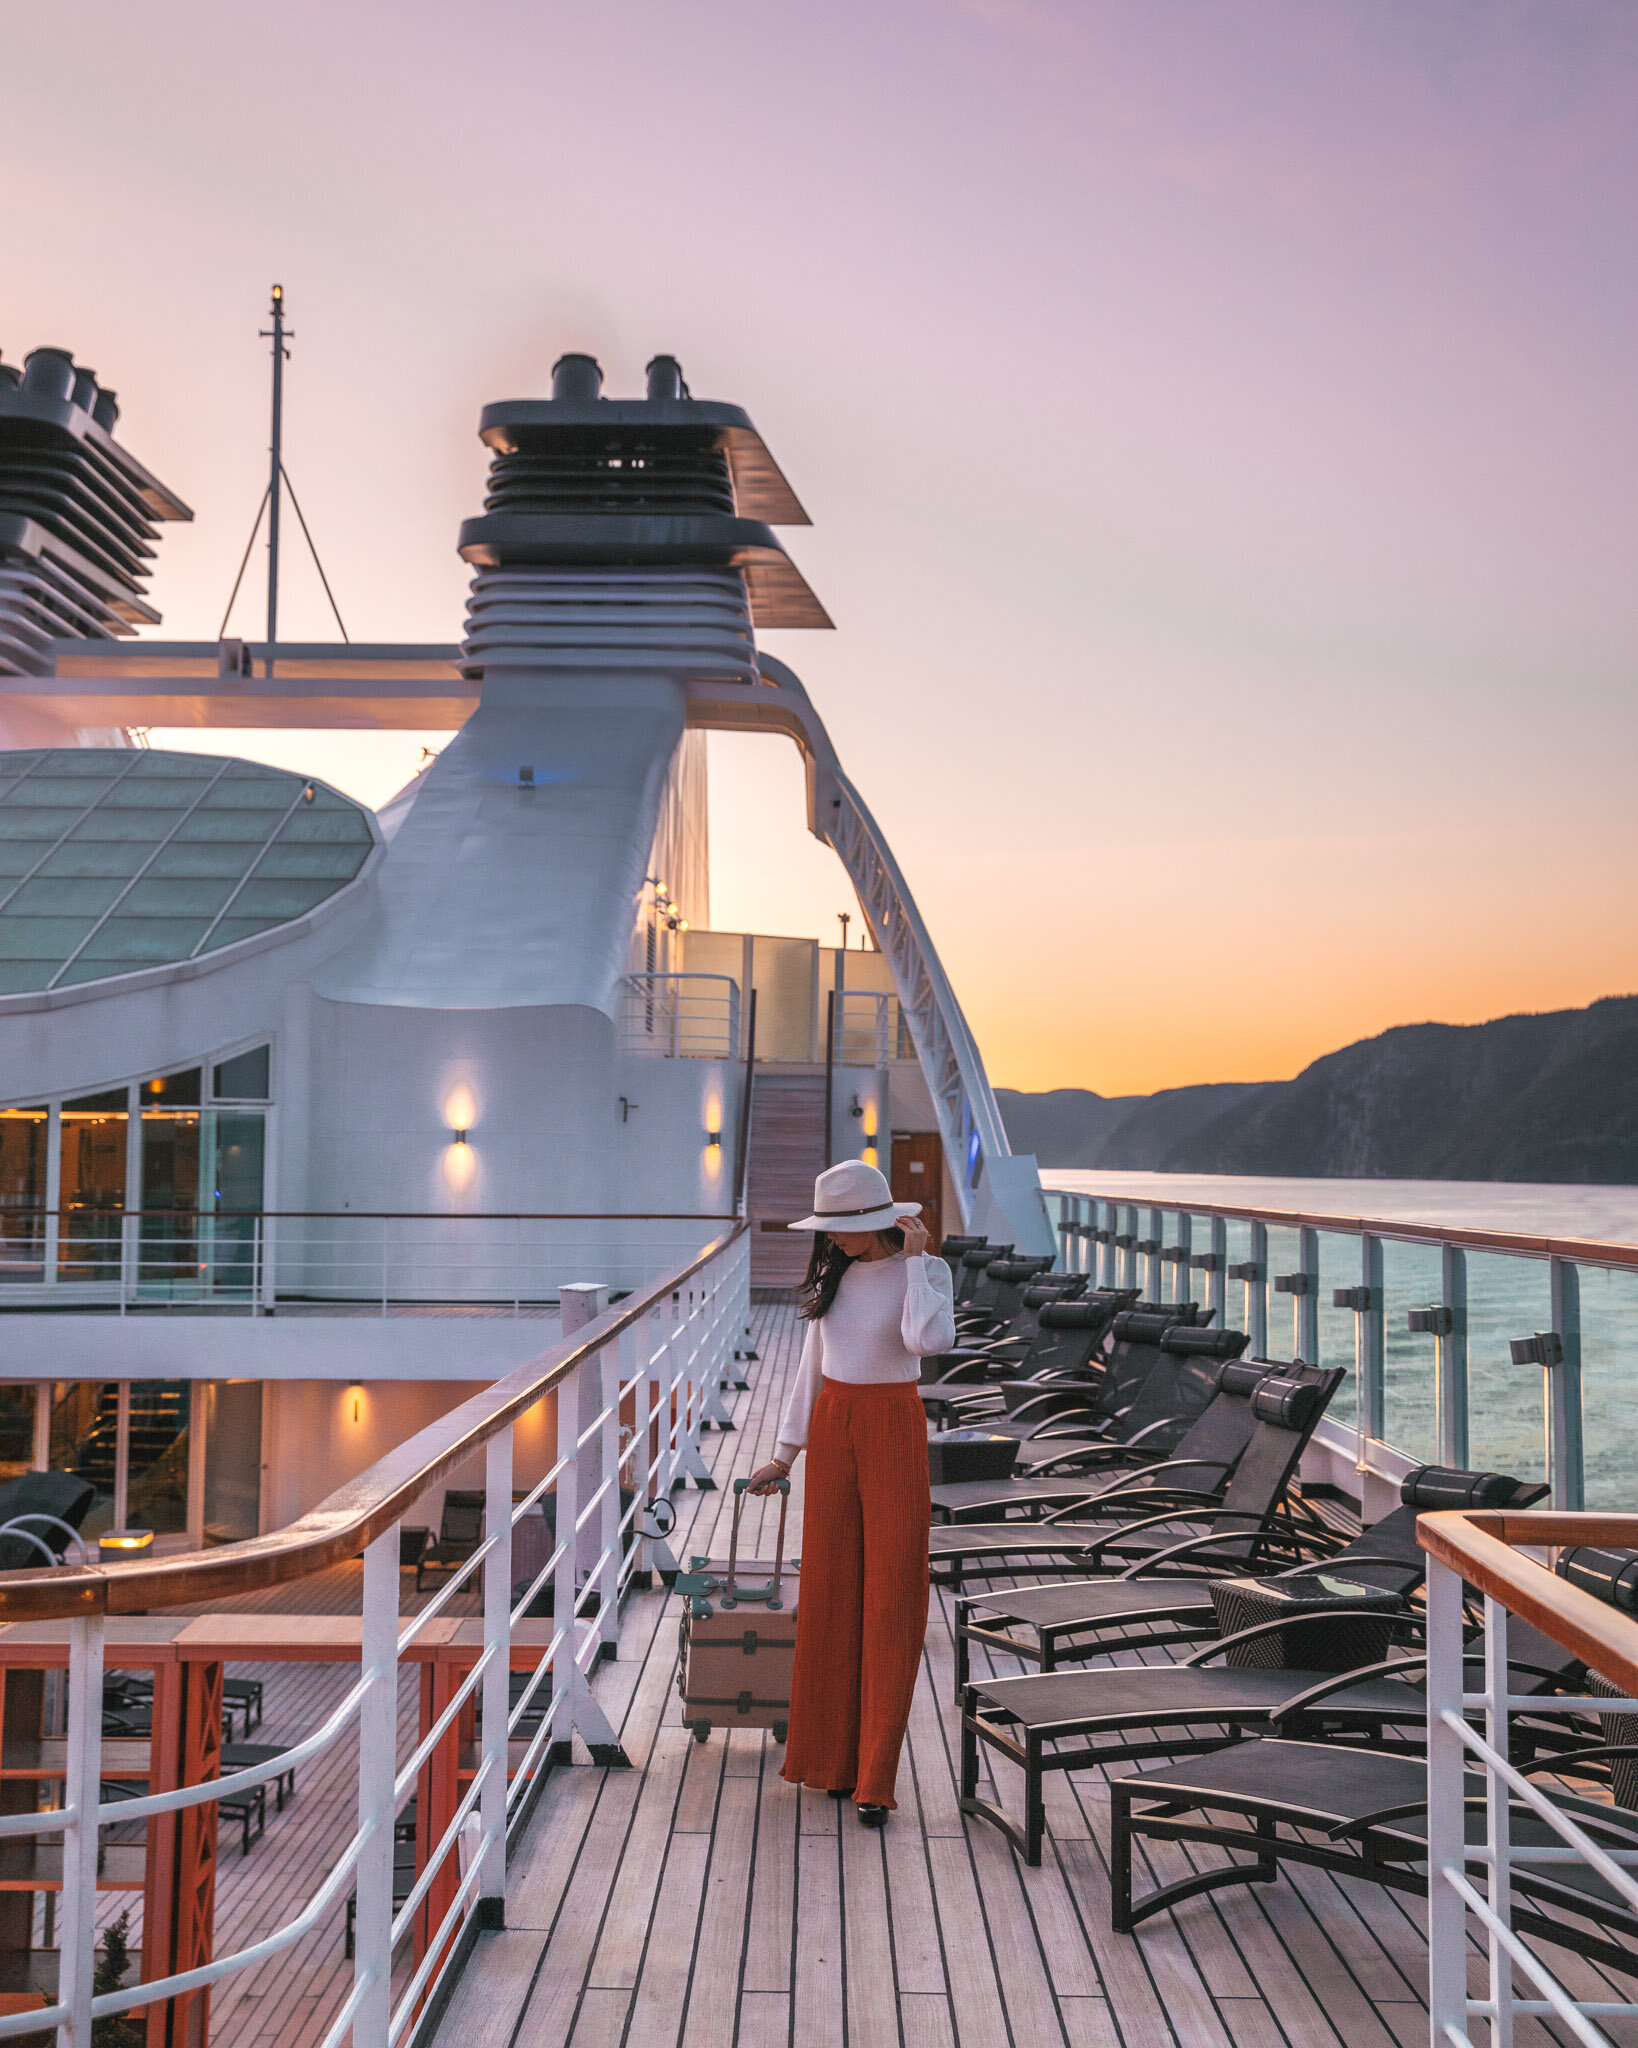 Seabourn Quest at sunset on the Saguenay Fjord in Canada // Cruise Review: 11-Day New England & Canada on the Seabourn Quest // #readysetjetset #canada #cruise #luxury #travel #cruising